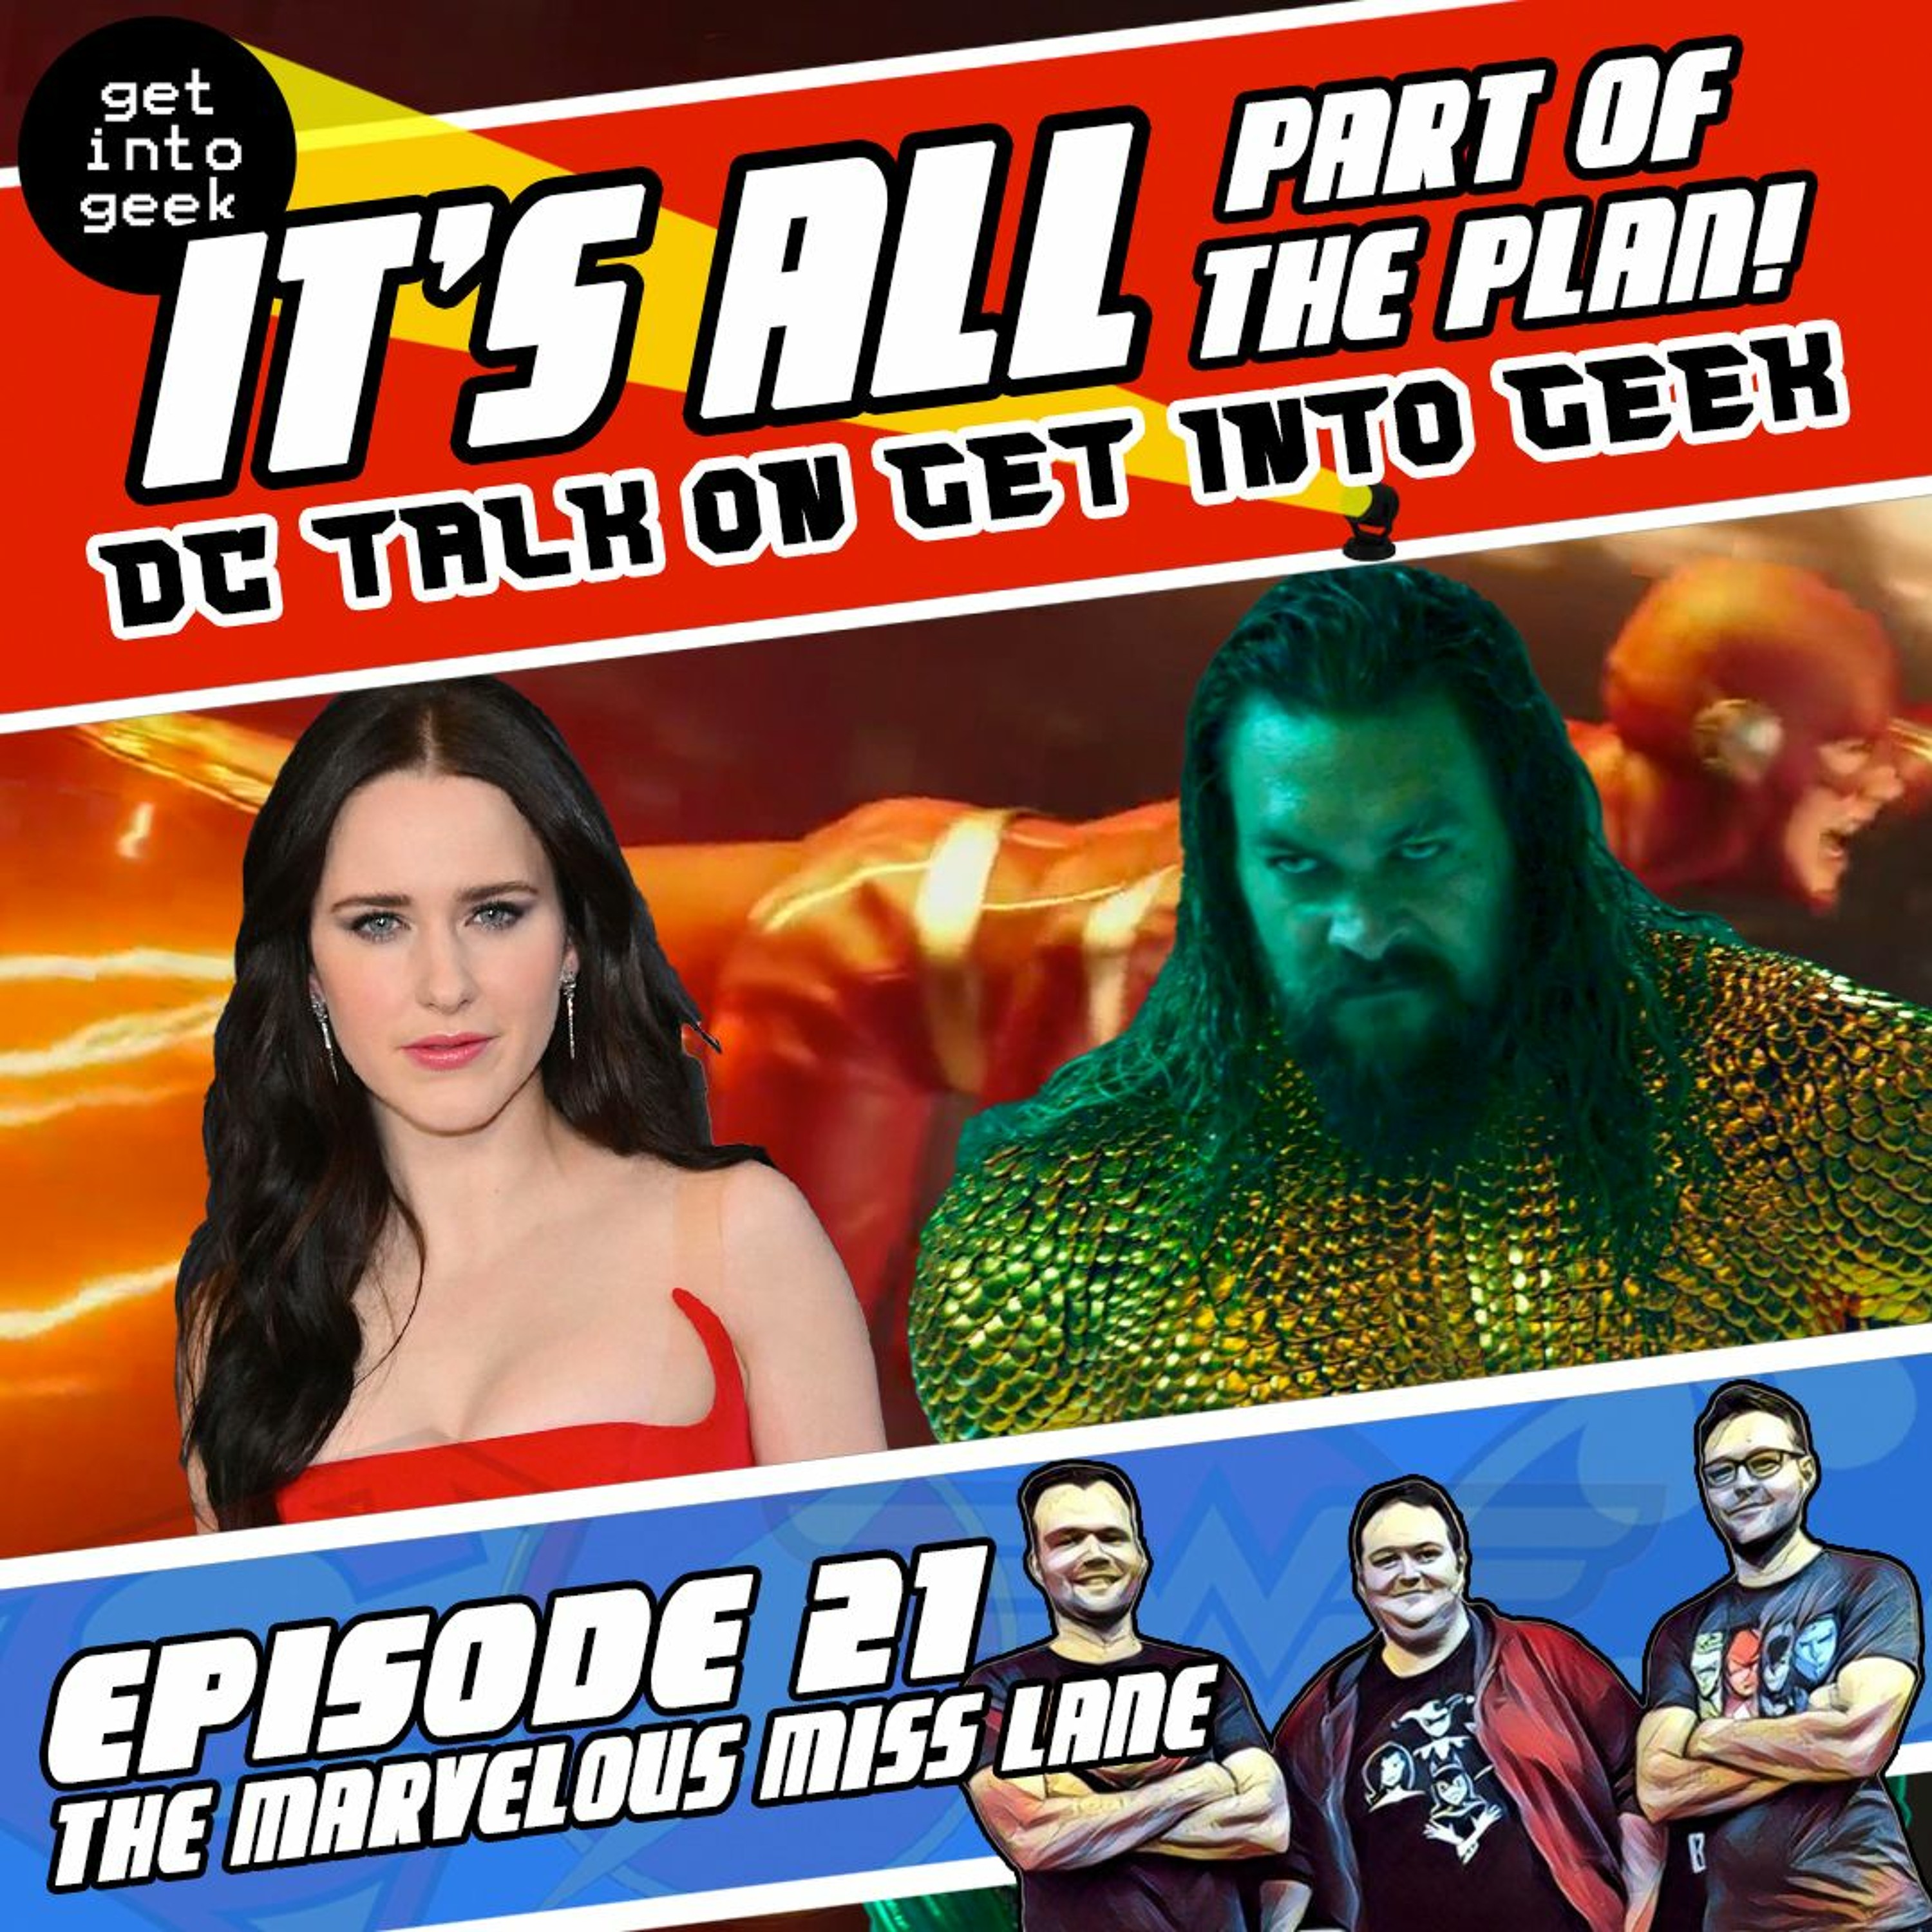 The Marvelous Miss Lane (It’s All Part Of The Plan - DC Talk Episode 1.21)